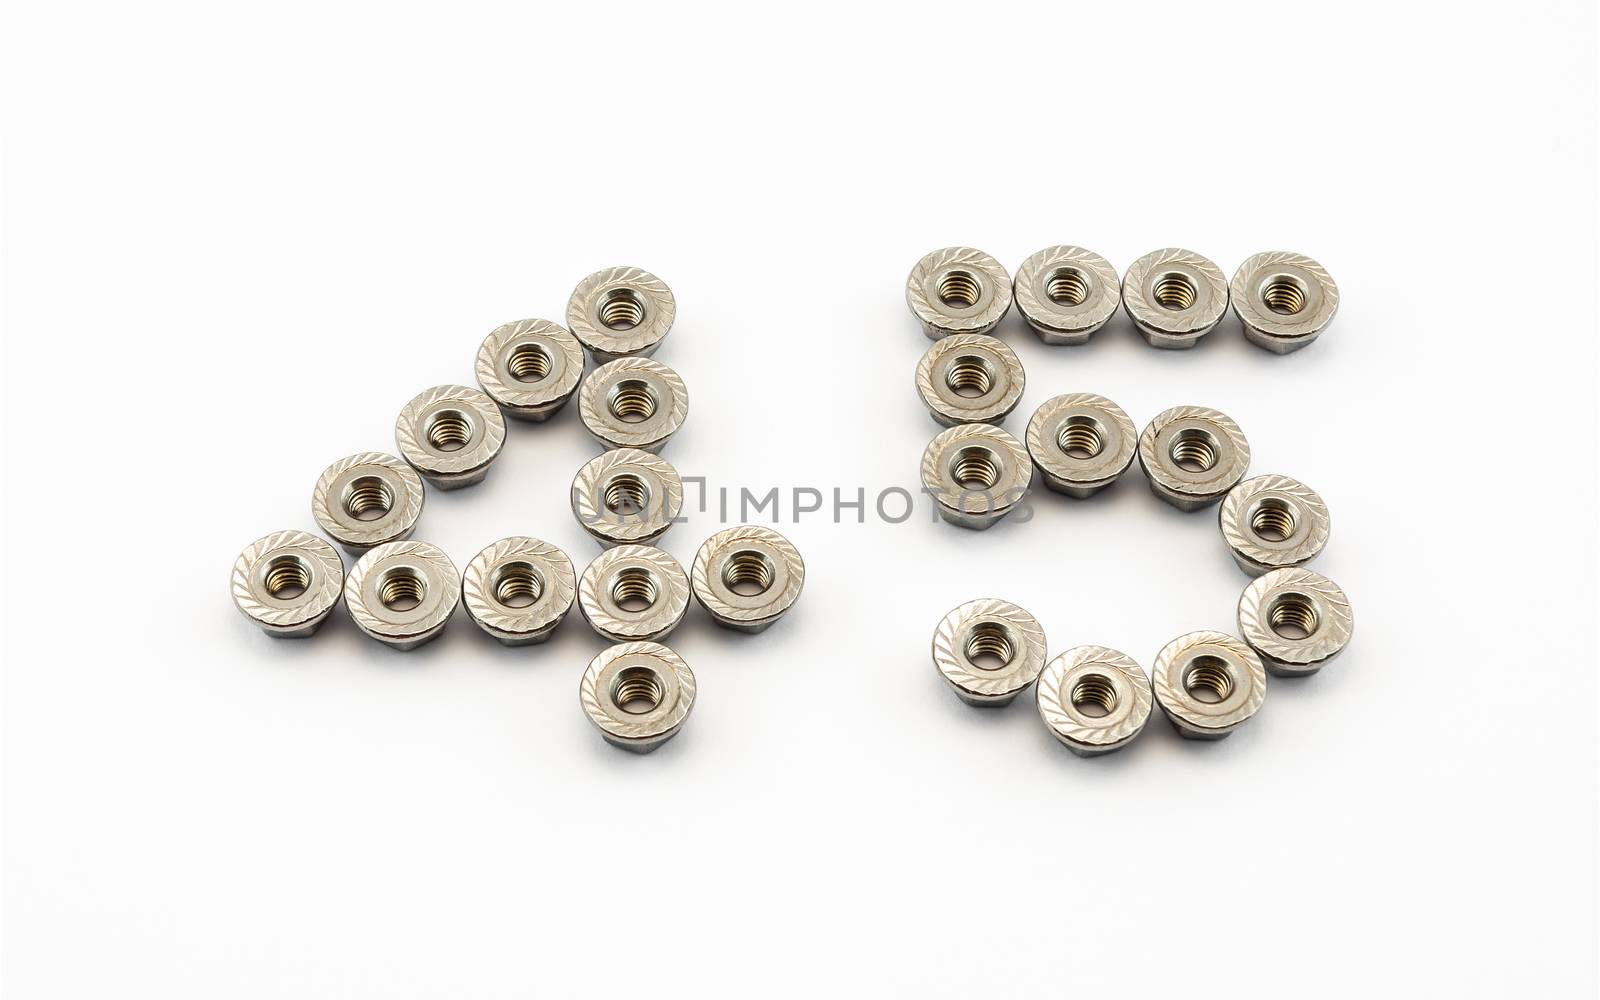 4 and 5 Number, Created by Stainless Steel Hex Flange Nuts by noneam